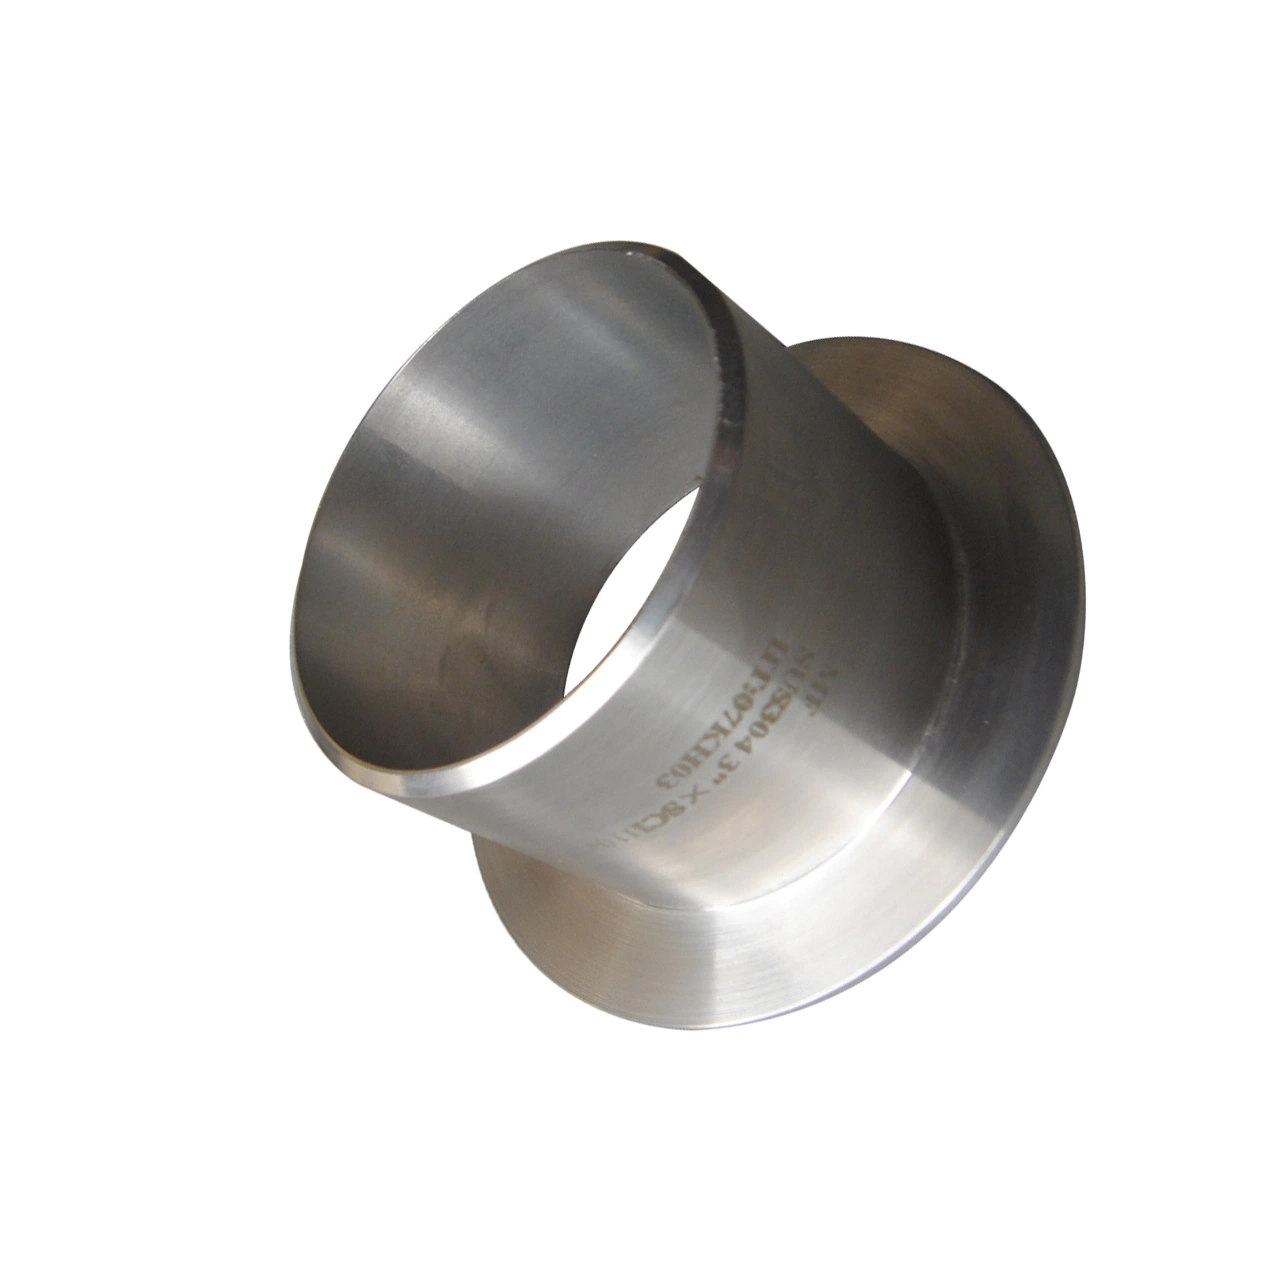 Ss321 Stainless Steel Bw Fittings Grade Pipe Fitting Butt Fusion Stub End